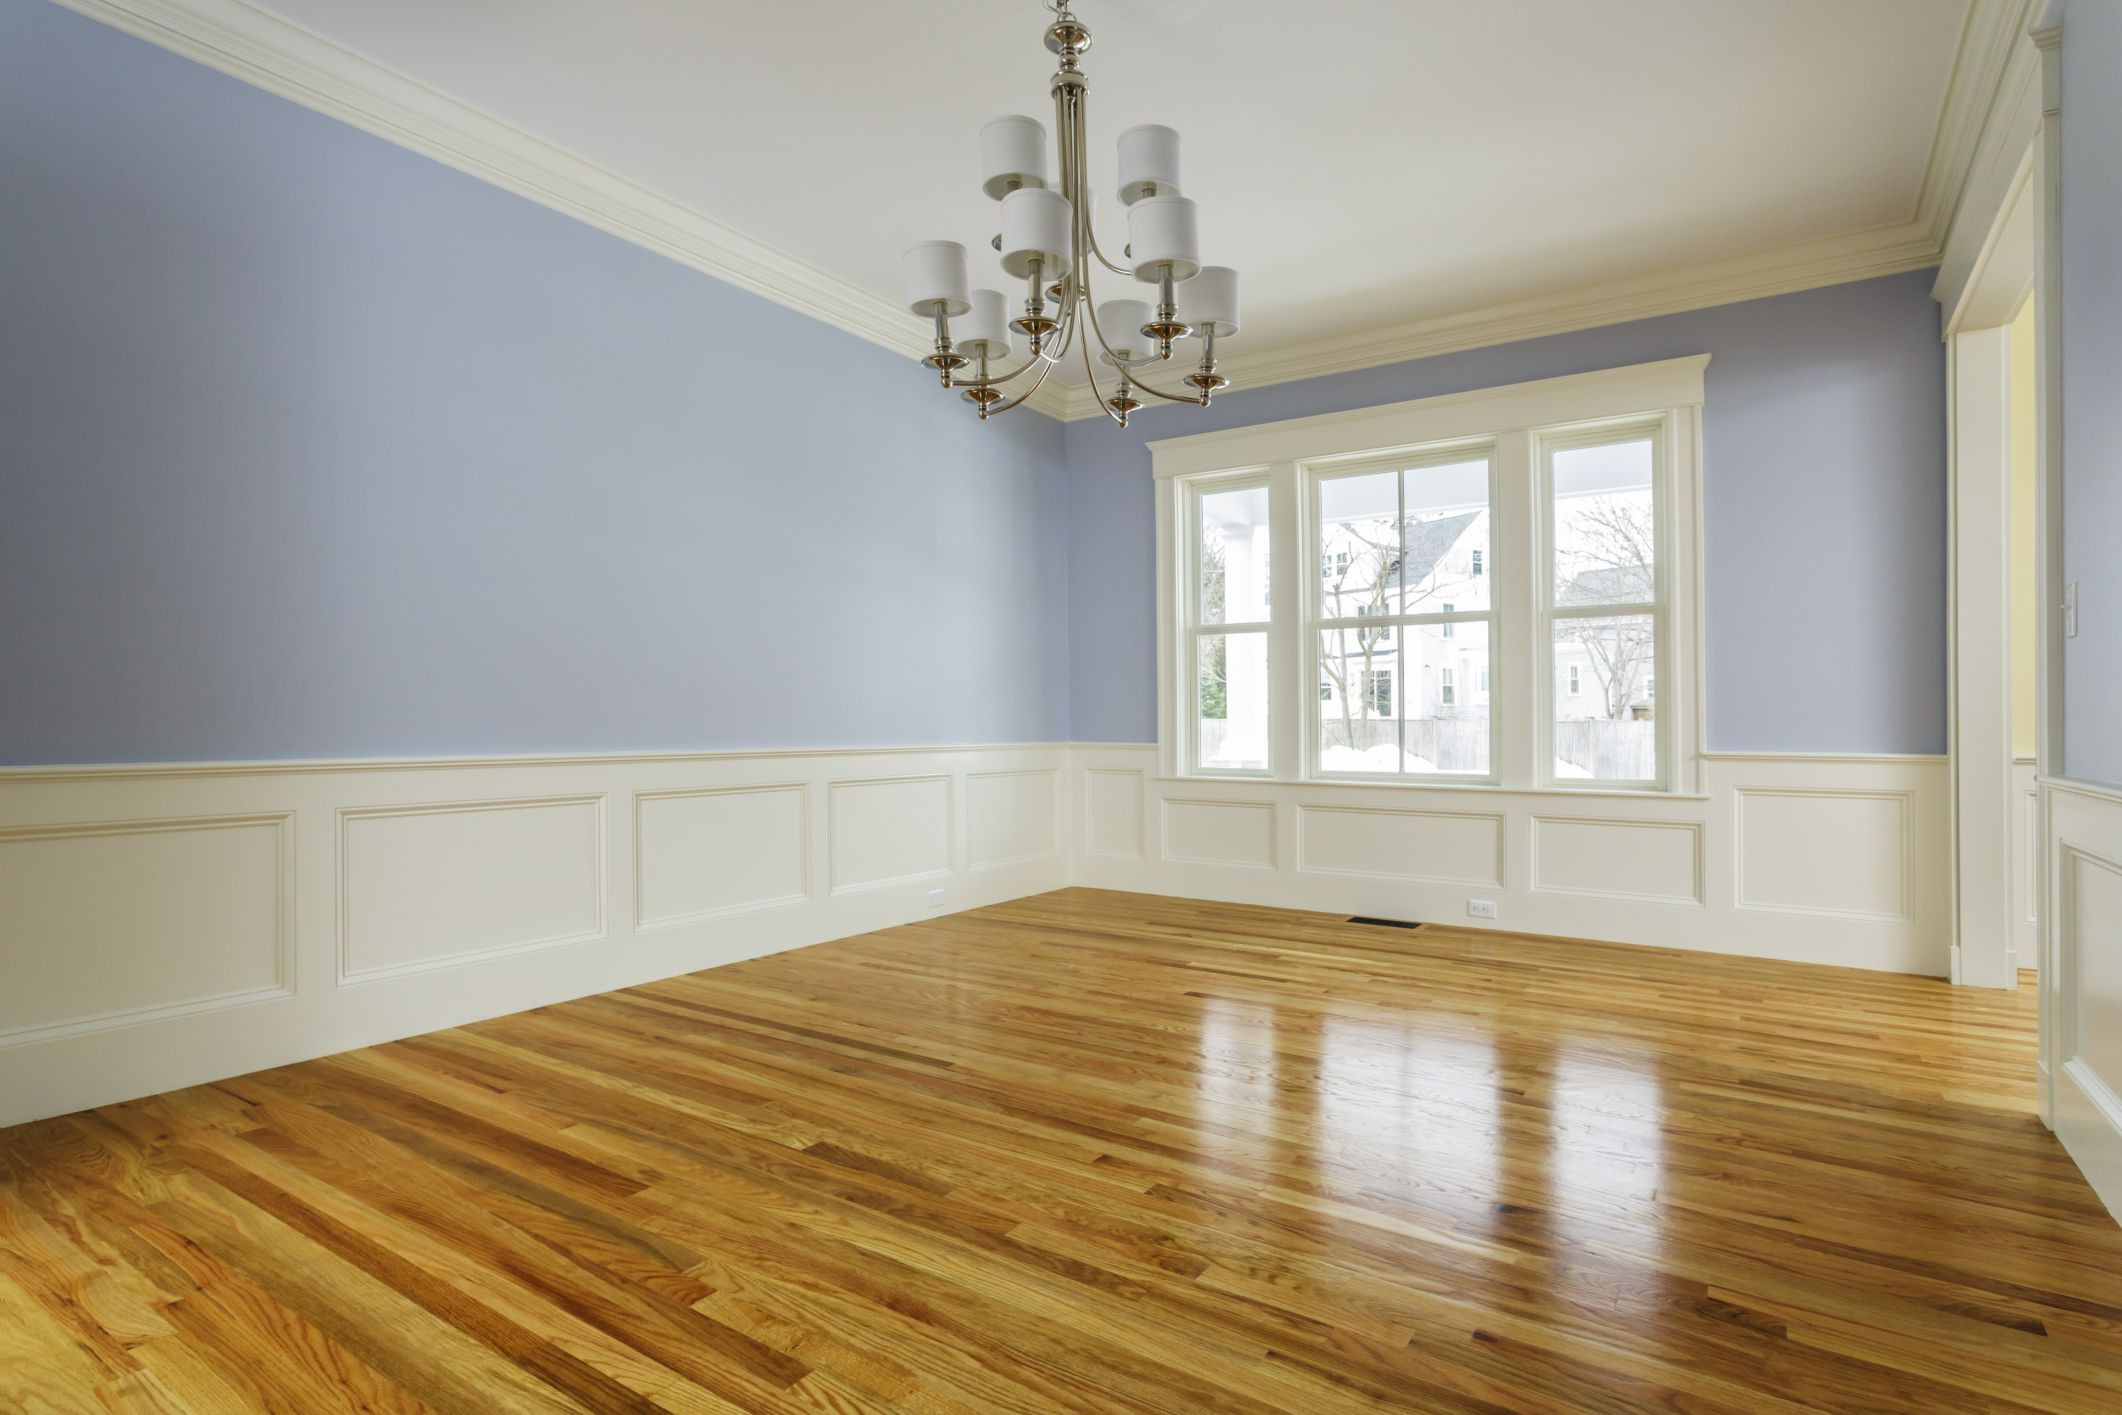 22 Nice Cost Of Hardwood Floors for 2000 Sq Ft 2024 free download cost of hardwood floors for 2000 sq ft of the cost to refinish hardwood floors with regard to 168686572 highres 56a2fd773df78cf7727b6cb3